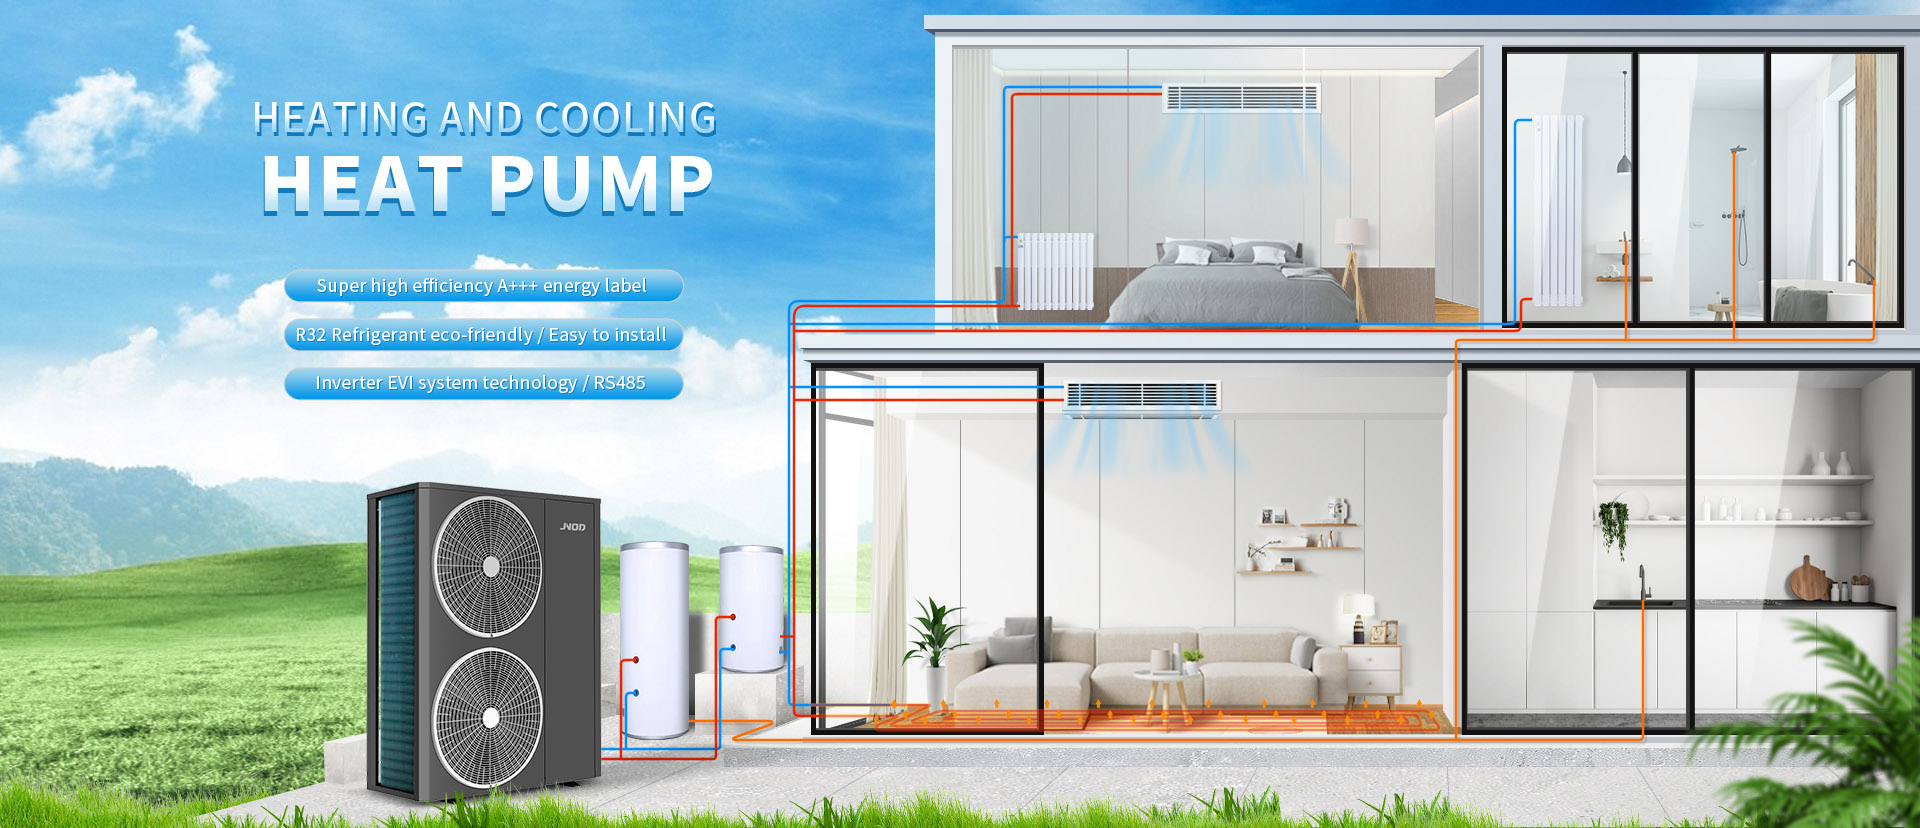 Green Heating And Cooling Heat Pump